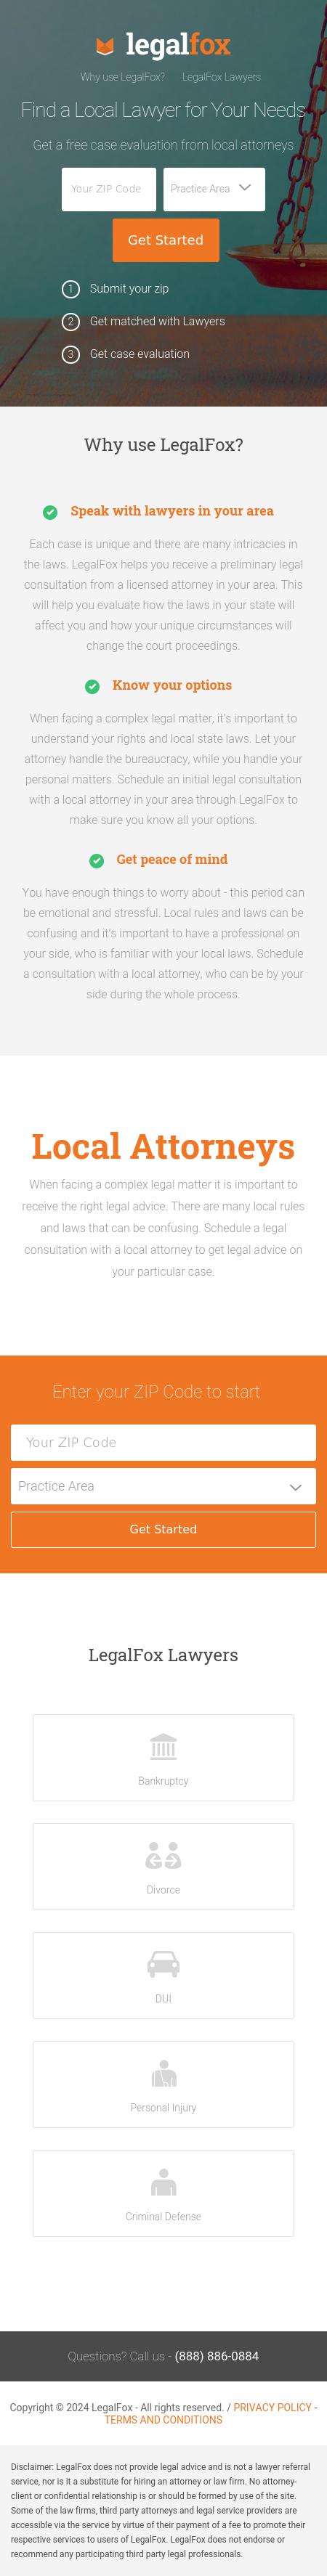 Find a Local Attorney - Columbus GA Lawyers